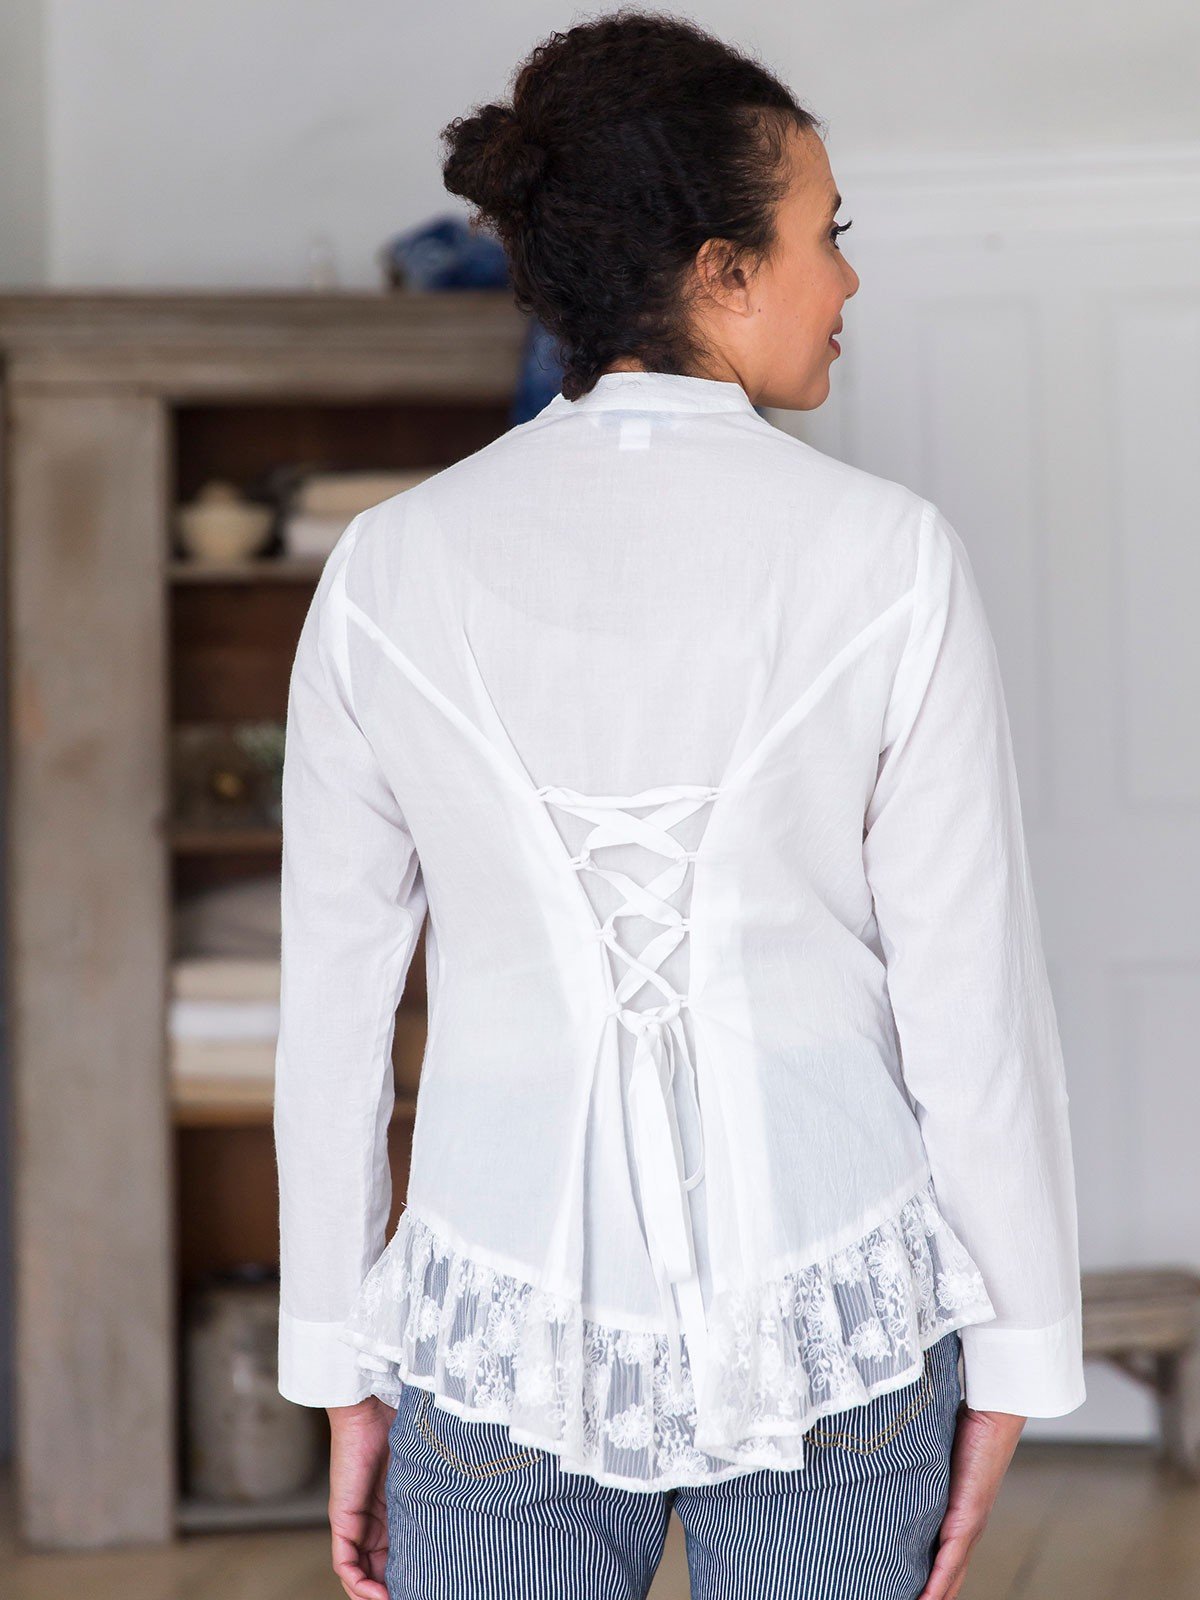 Victorian Blouse in White | April Cornell - SOLD OUT